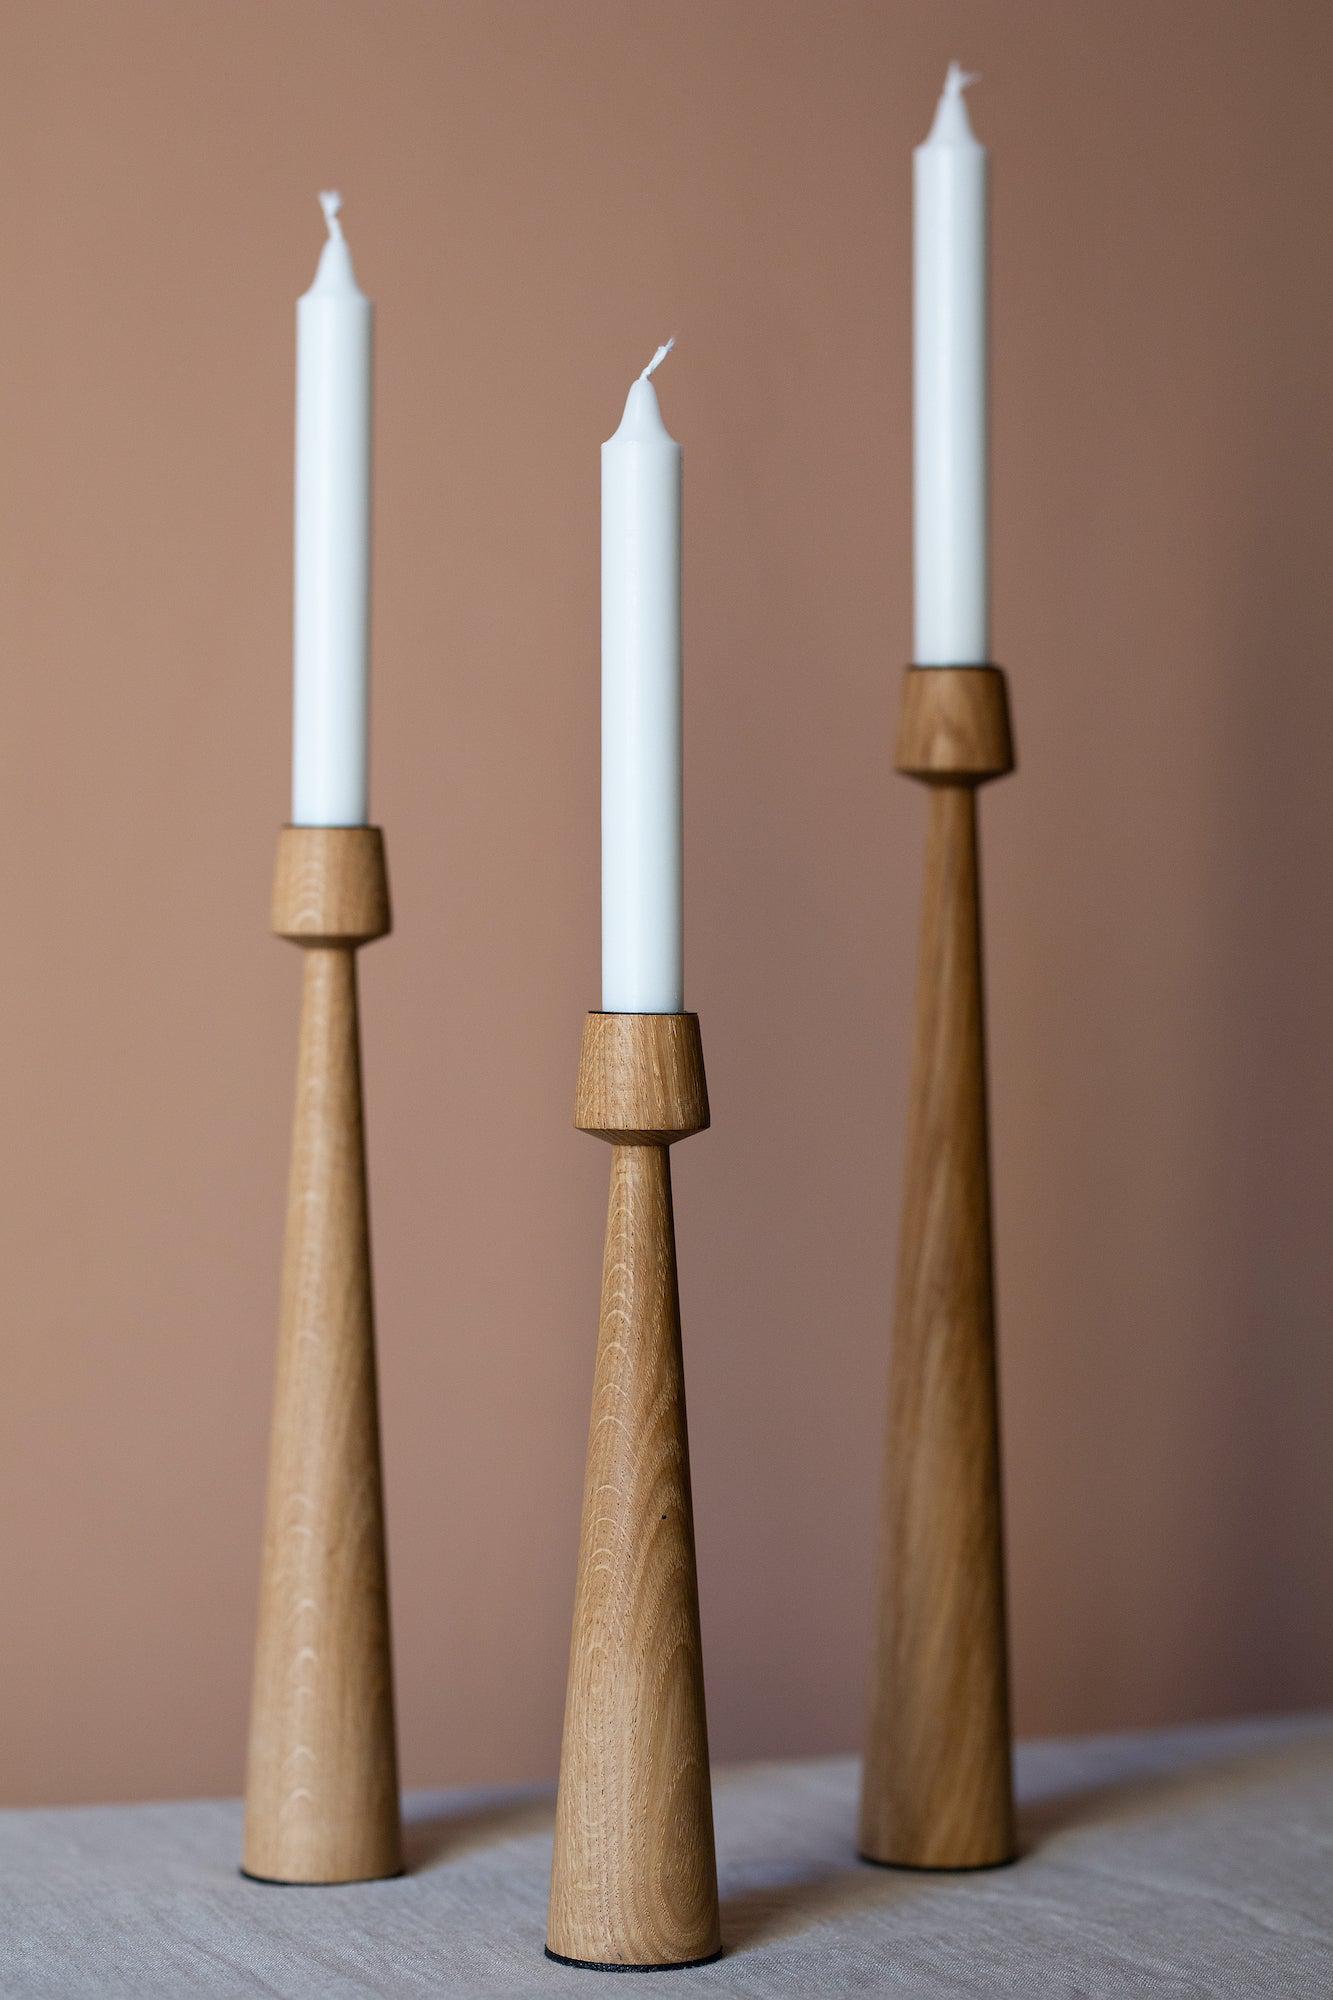 Aukstas Tower Oak Candlesticks (Set of 3)-Home Goods-CANDLE HOLDERS, CANDLES, SUPPORT / BASES / STANDS, SUSTAINABLE DECOR-Forest Homes-Nature inspired decor-Nature decor